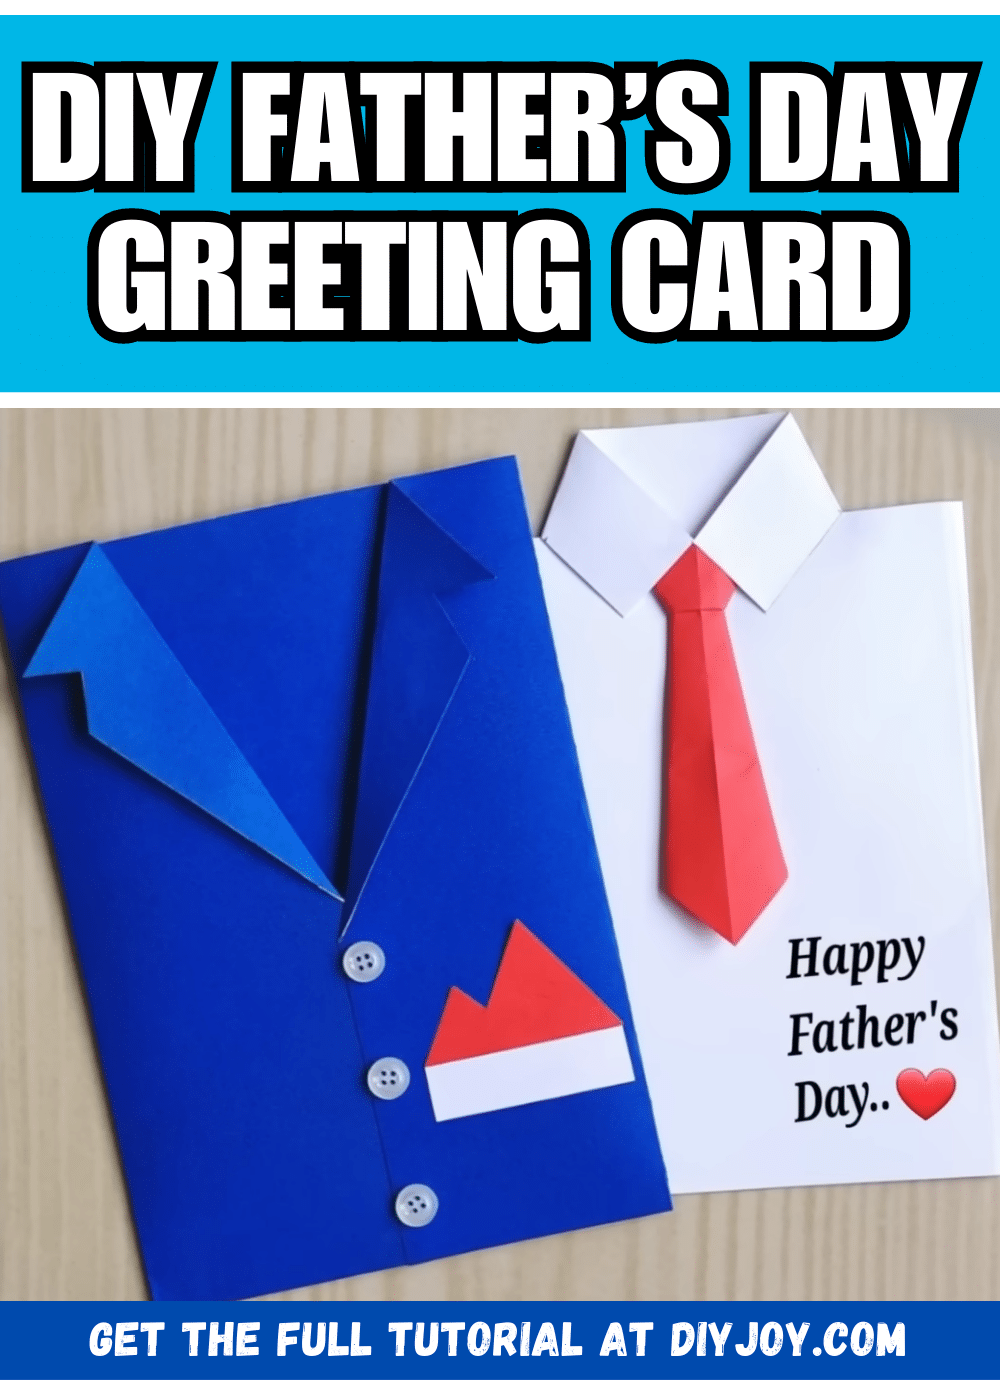 Easy DIY Father’s Day Greeting Card Tutorial